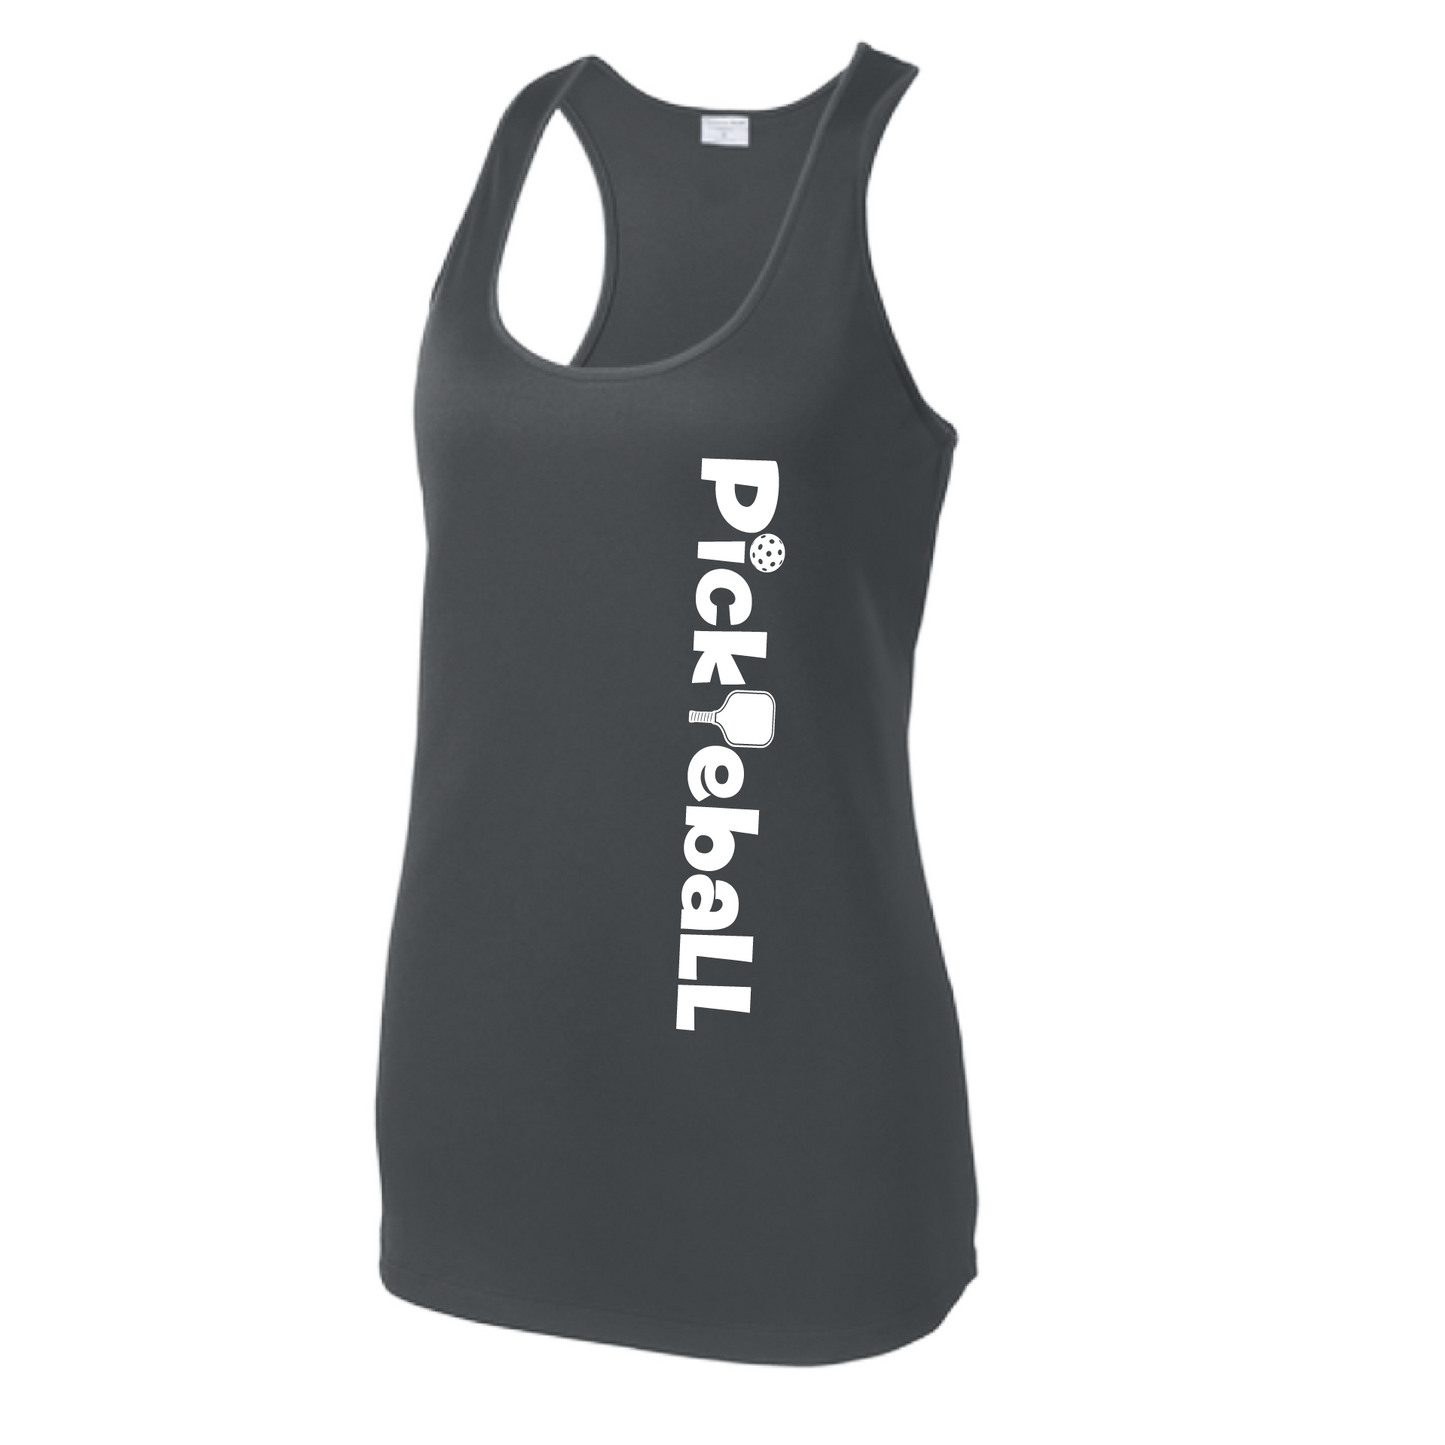 Pickleball Design: Pickleball Horizontal Customizable location  Women's Style: Racerback Tank  Turn up the volume in this Women's shirt with its perfect mix of softness and attitude. Material is ultra-comfortable with moisture wicking properties and tri-blend softness. PosiCharge technology locks in color. Highly breathable and lightweight.